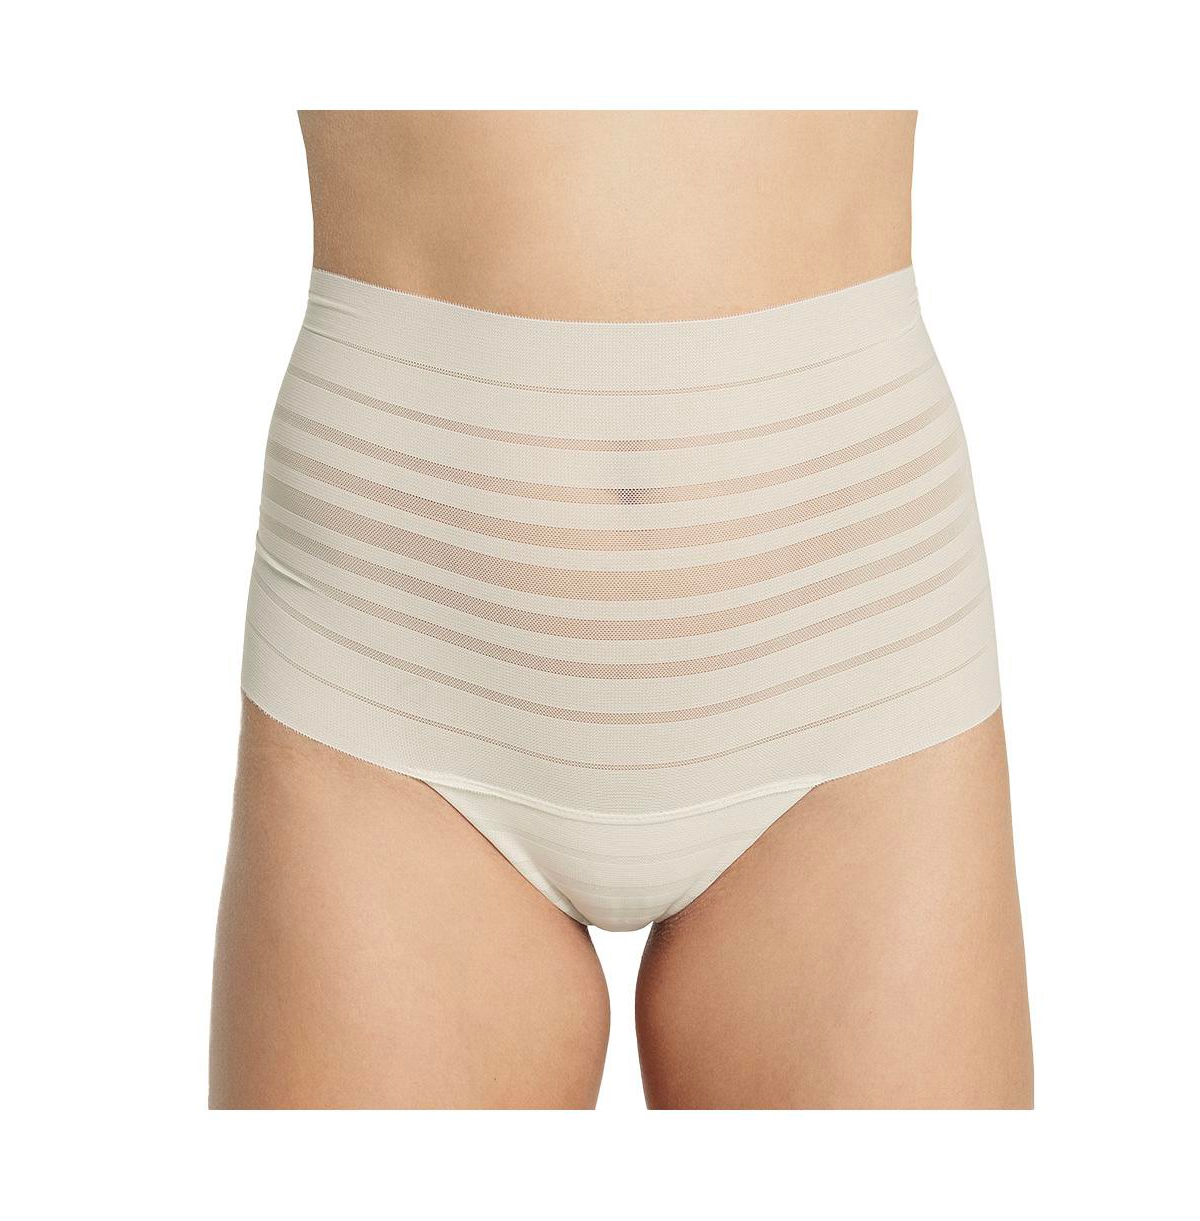 Women's Lace Stripe High-Waisted Cheeky Hipster Panty - Light Beige